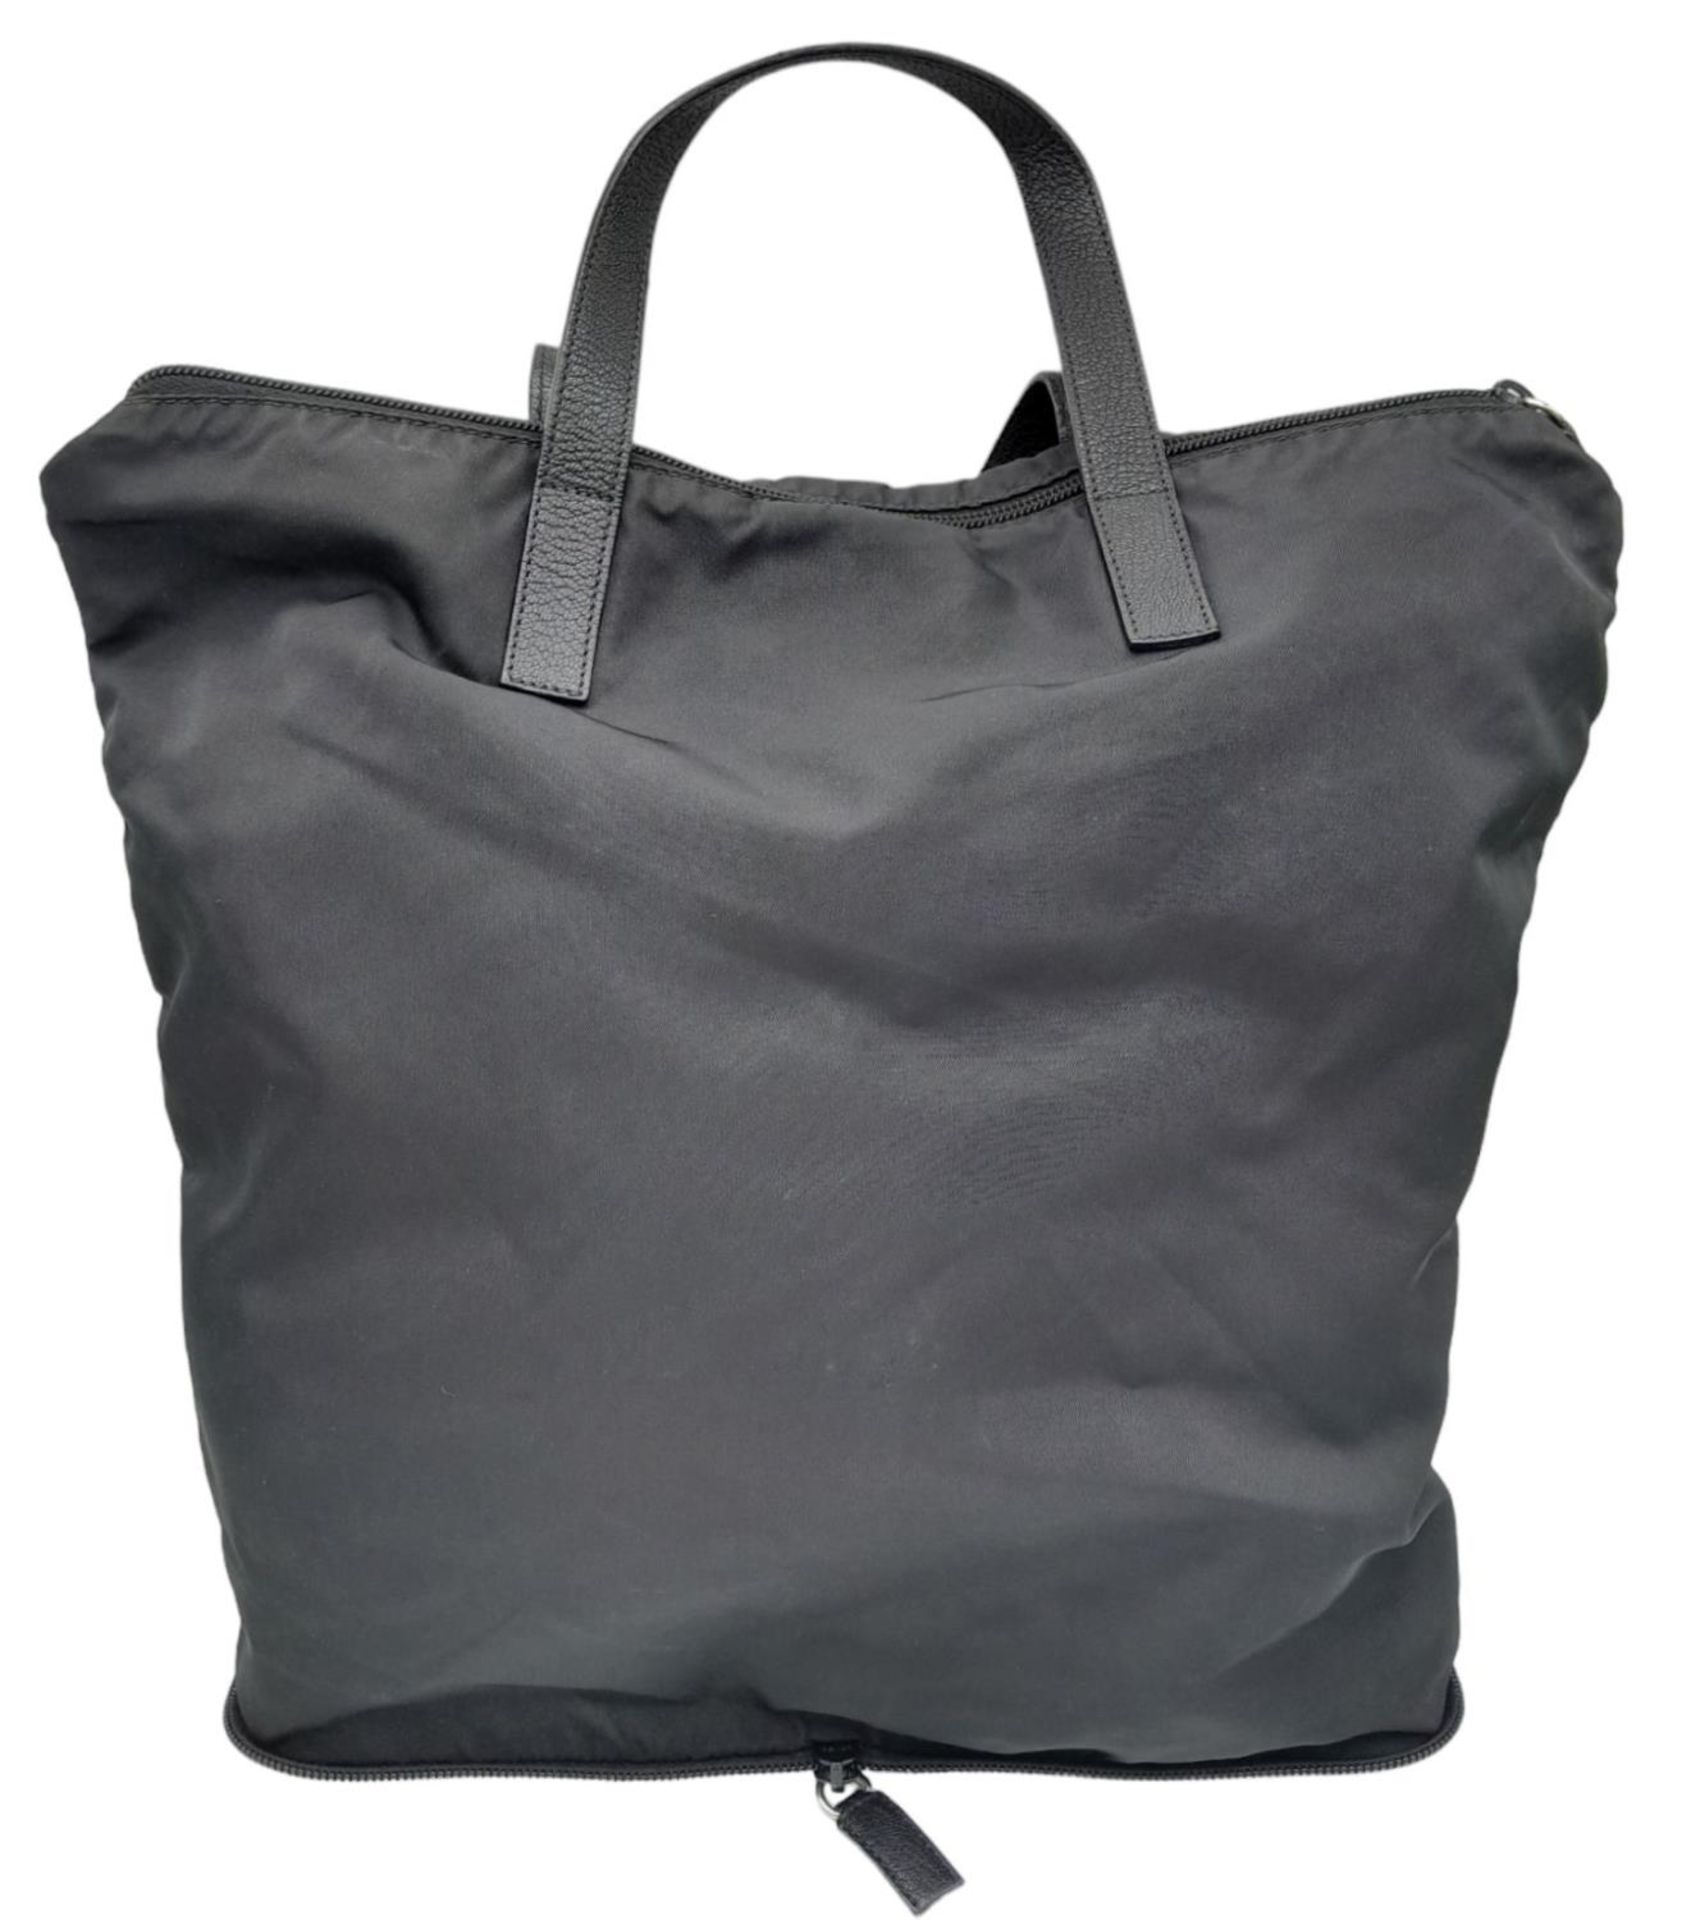 A Prada Black Compactable Tote Bag. Textile exterior with leather handles and zip top closure. Black - Image 2 of 12